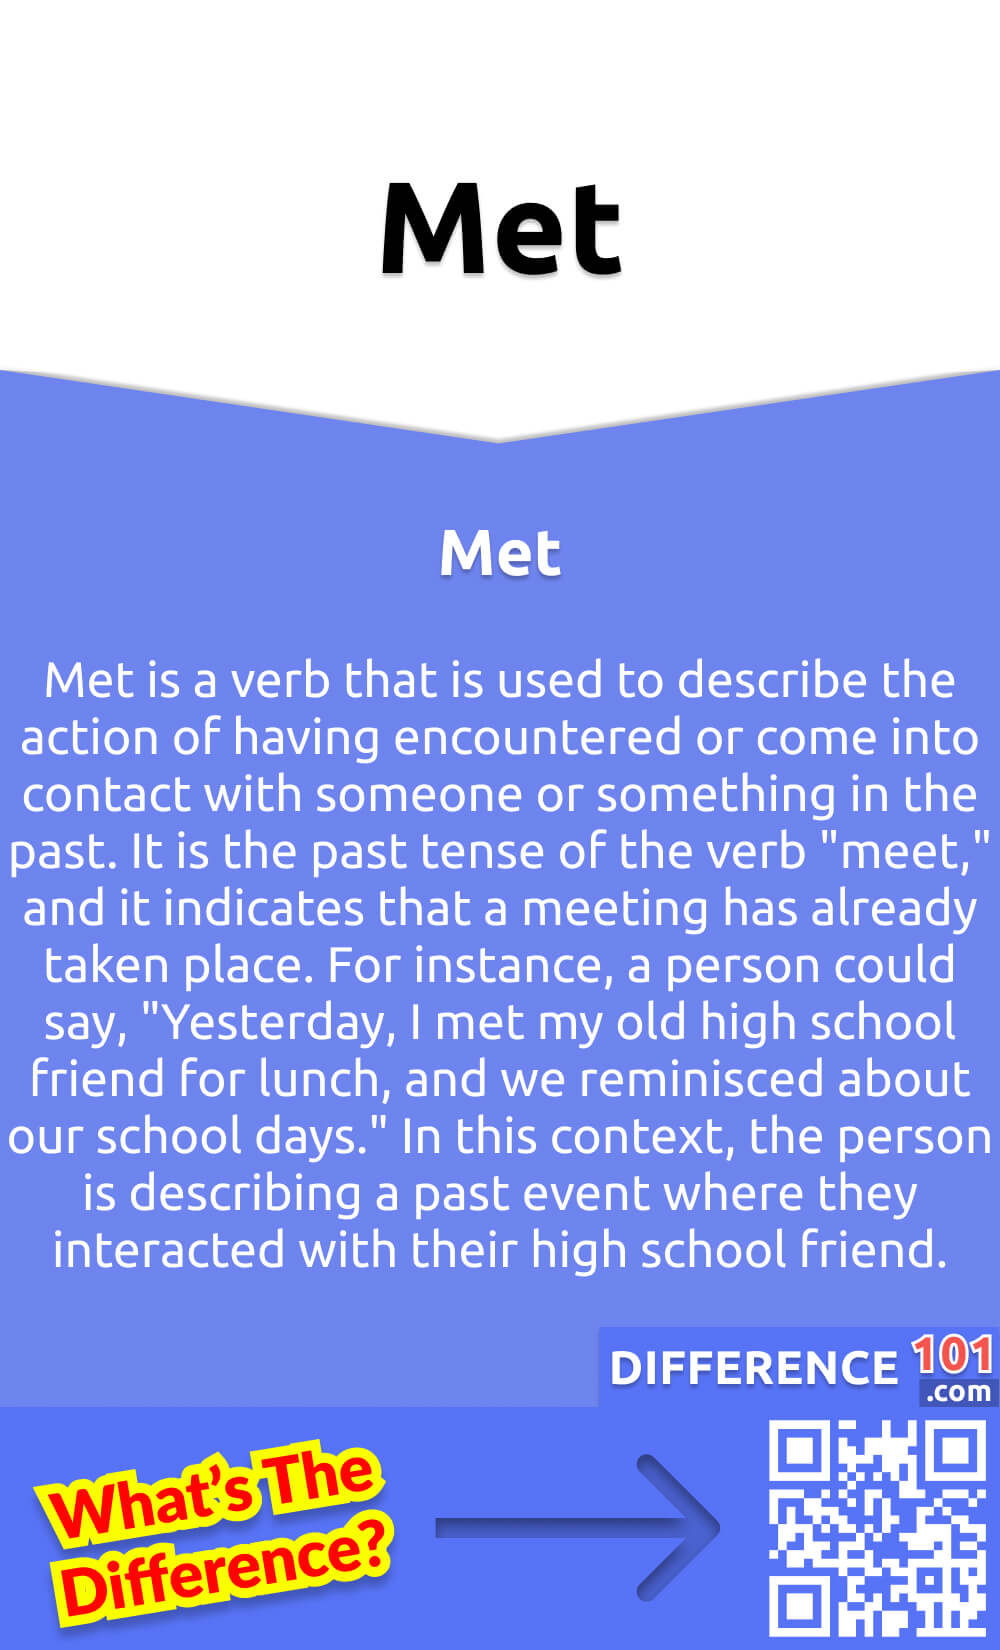 What Is Met? Met is a verb that is used to describe the action of having encountered or come into contact with someone or something in the past. It is the past tense of the verb "meet," and it indicates that a meeting has already taken place. For instance, a person could say, "Yesterday, I met my old high school friend for lunch, and we reminisced about our school days." In this context, the person is describing a past event where they interacted with their high school friend. The use of "met" here emphasizes that the meeting occurred in the past and is now completed. As such, "met" is a vital verb for describing past events that involve interactions with other people or objects.